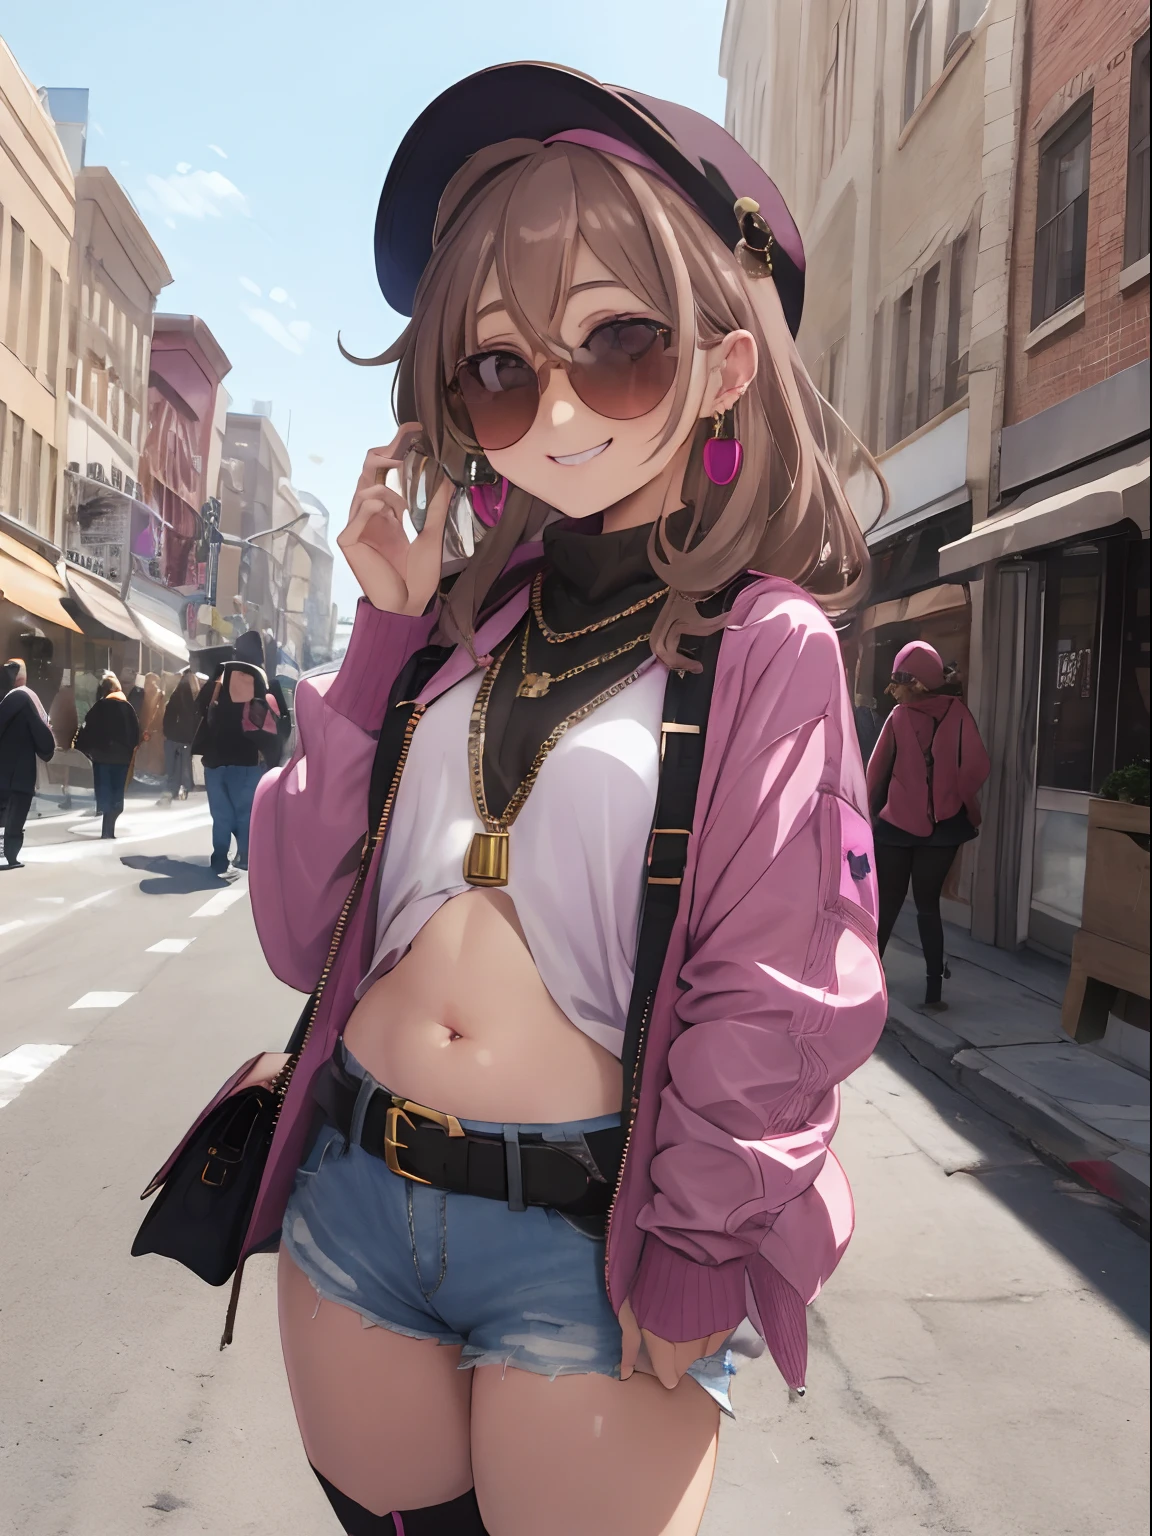 Crowded Downtown,Long-sleeved T-shirt that shows the chest,Navel Fashion,Oversized jacket,Shorts and knee-high socks,garterbelts,long boots, Light Brown Straight Hair,Eyes are pink,Wear sunglasses、Wearing a hat with a brim,Shoulder bag,Tapioca Drink,slightly red cheeks,a smile,Smile shyly with a little down,Ring earrings,Packed with accessories such as necklaces and rings,gals